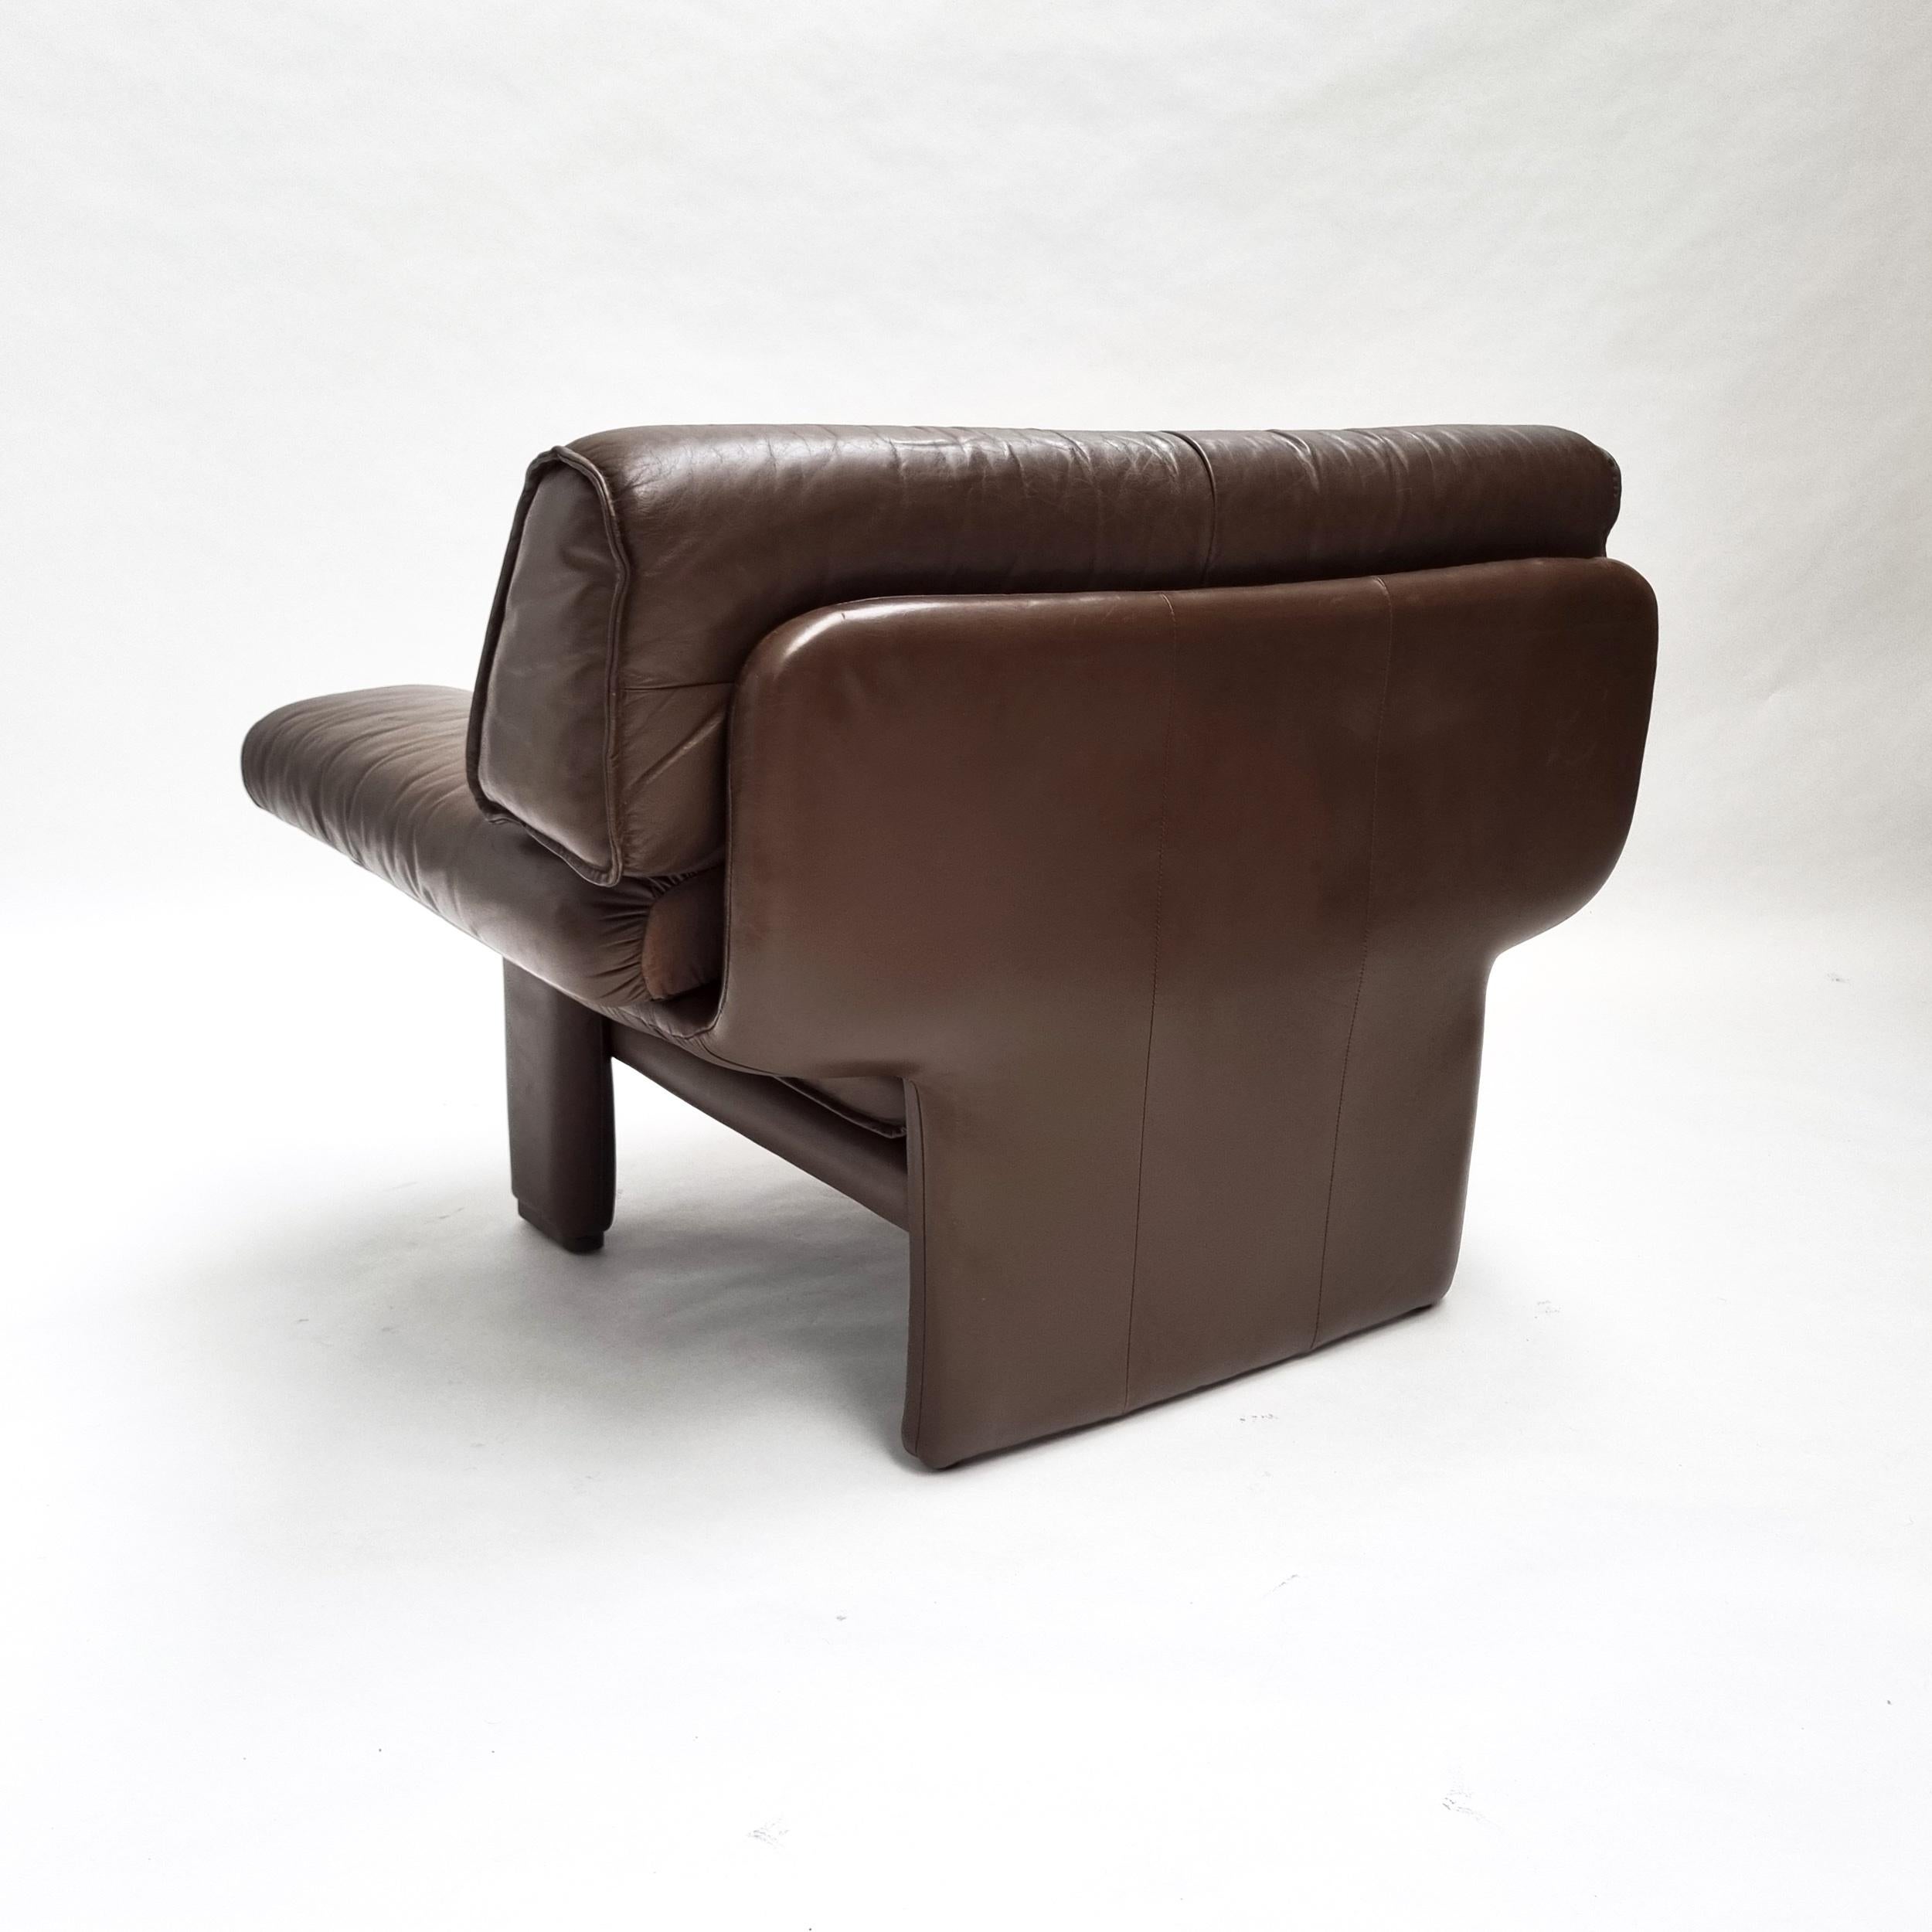 Late 20th Century Brown Leather Brutalist Lounge Chair, 1970s For Sale